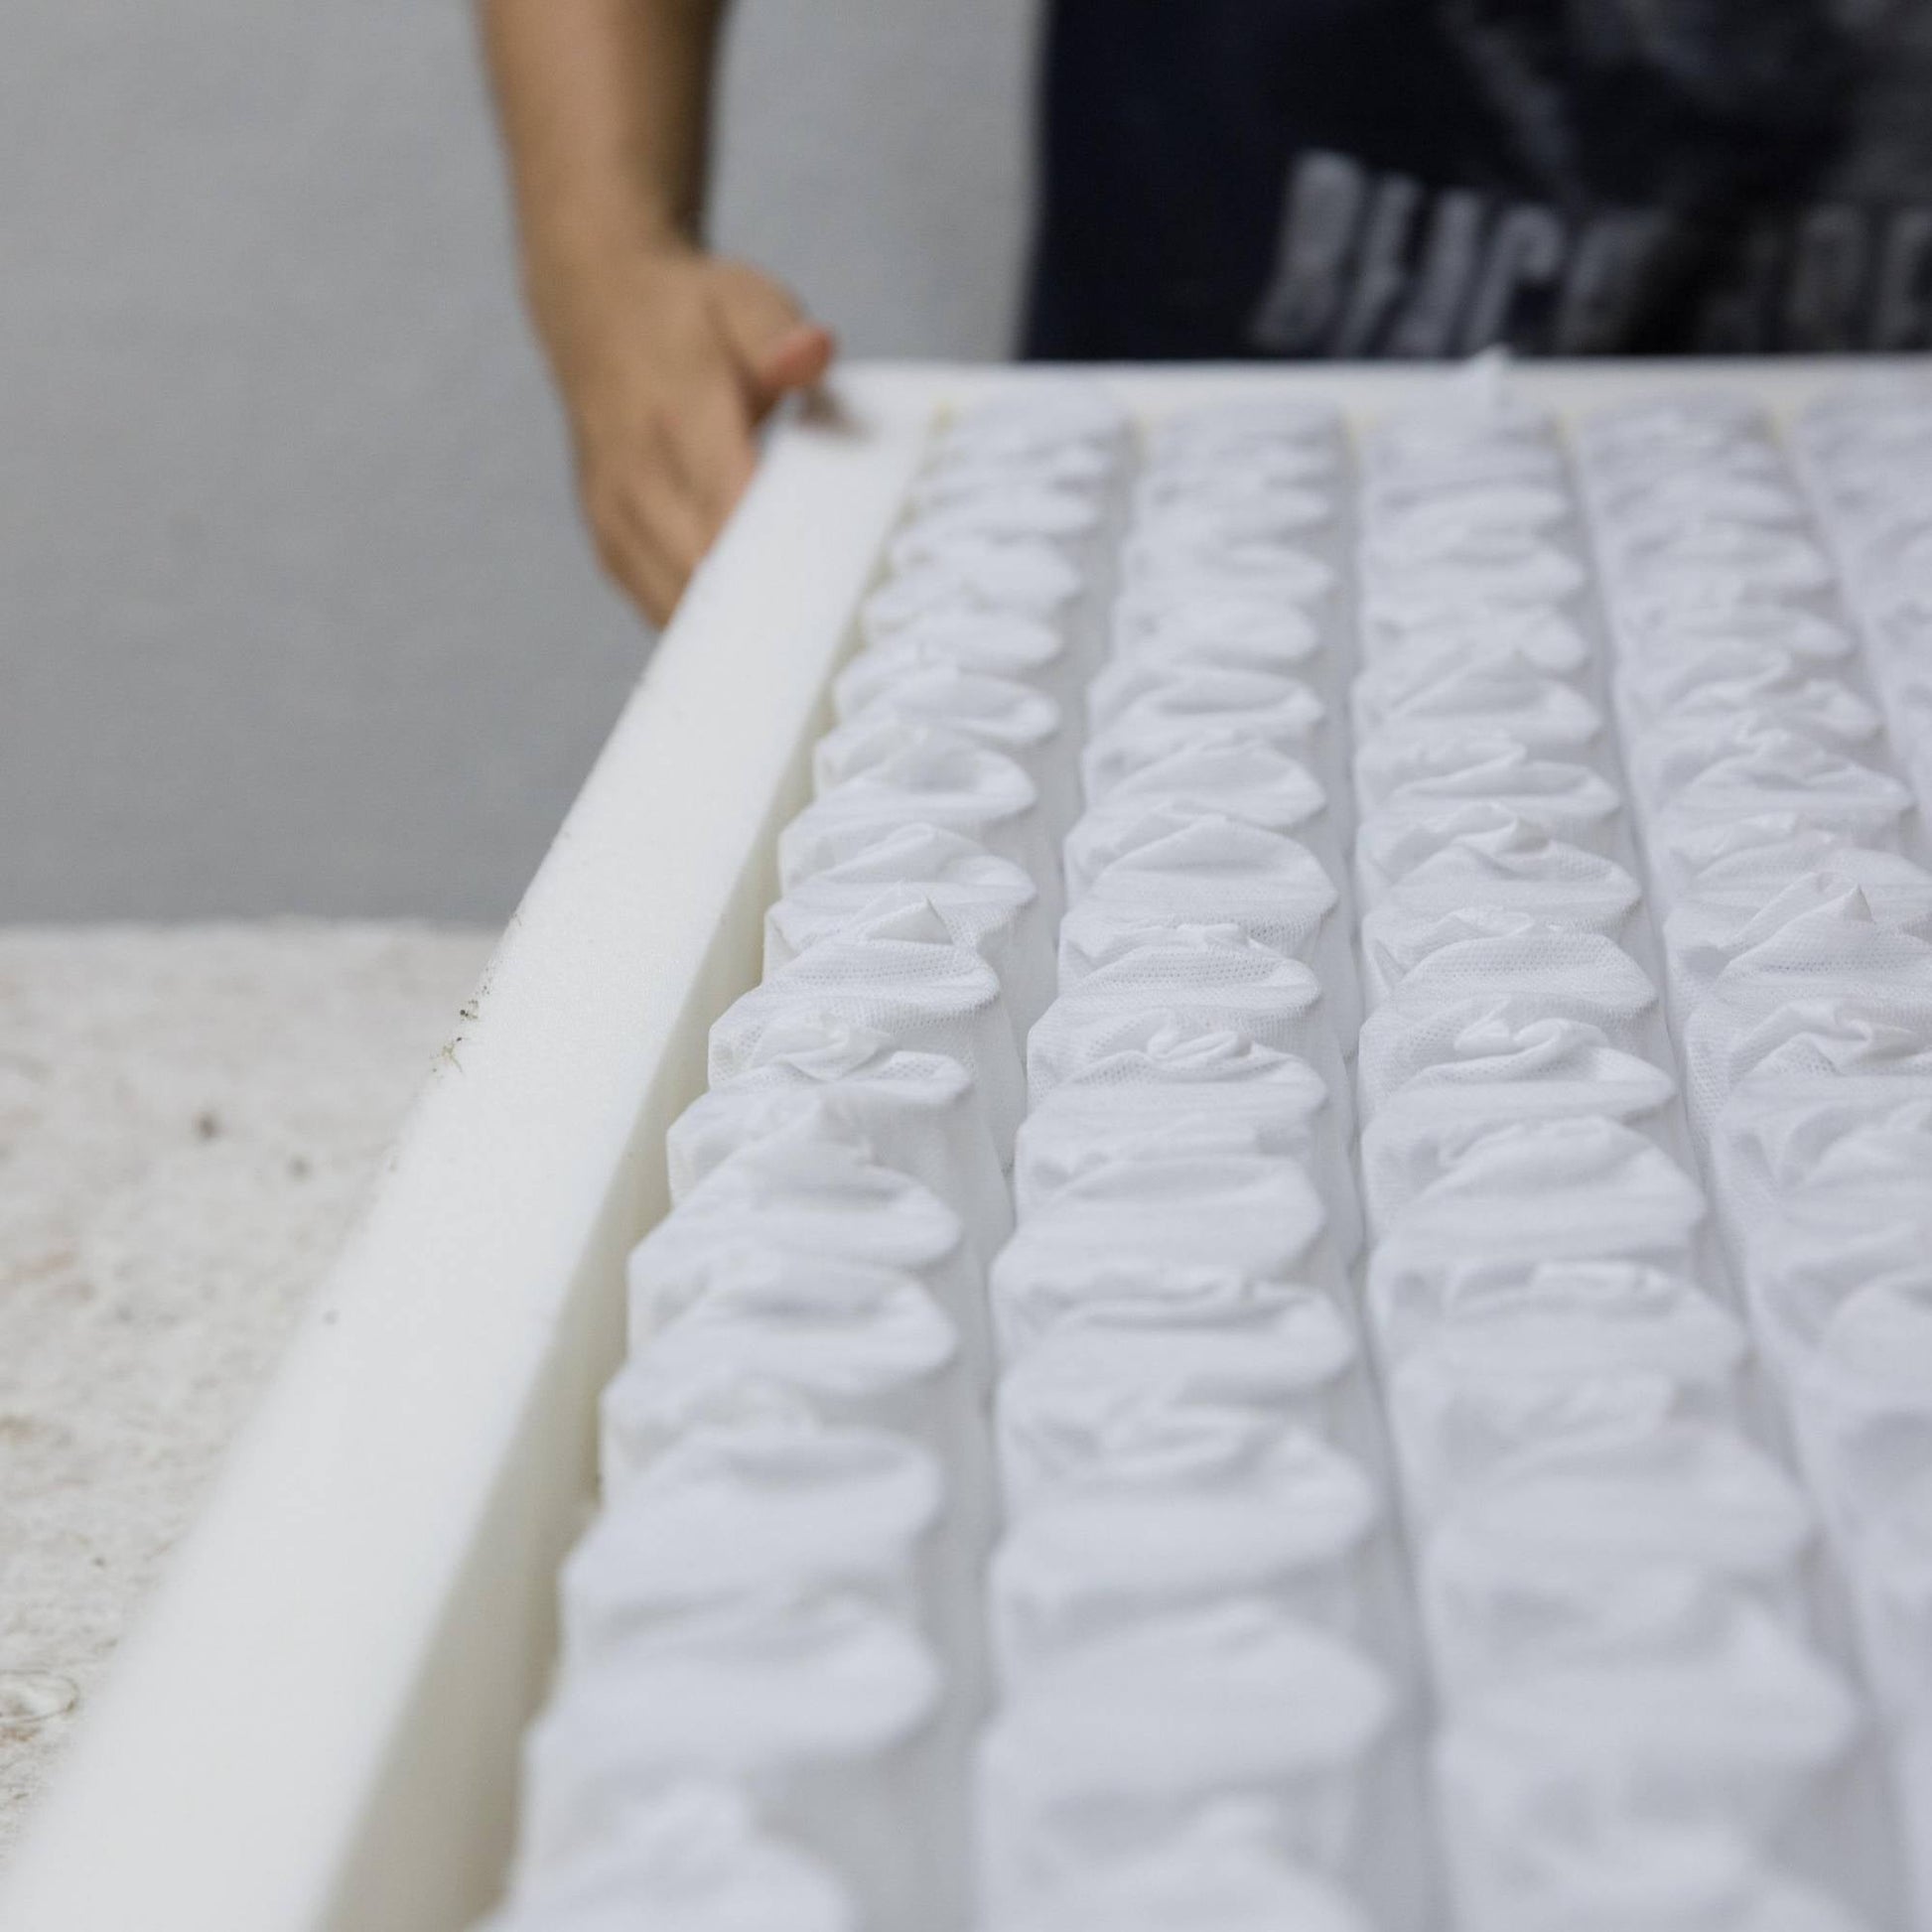 A craftsman hand-assembles a Hybrid Caravan Mattress, featuring a foam-encapsulated border and visible pocket springs, on a worktable.